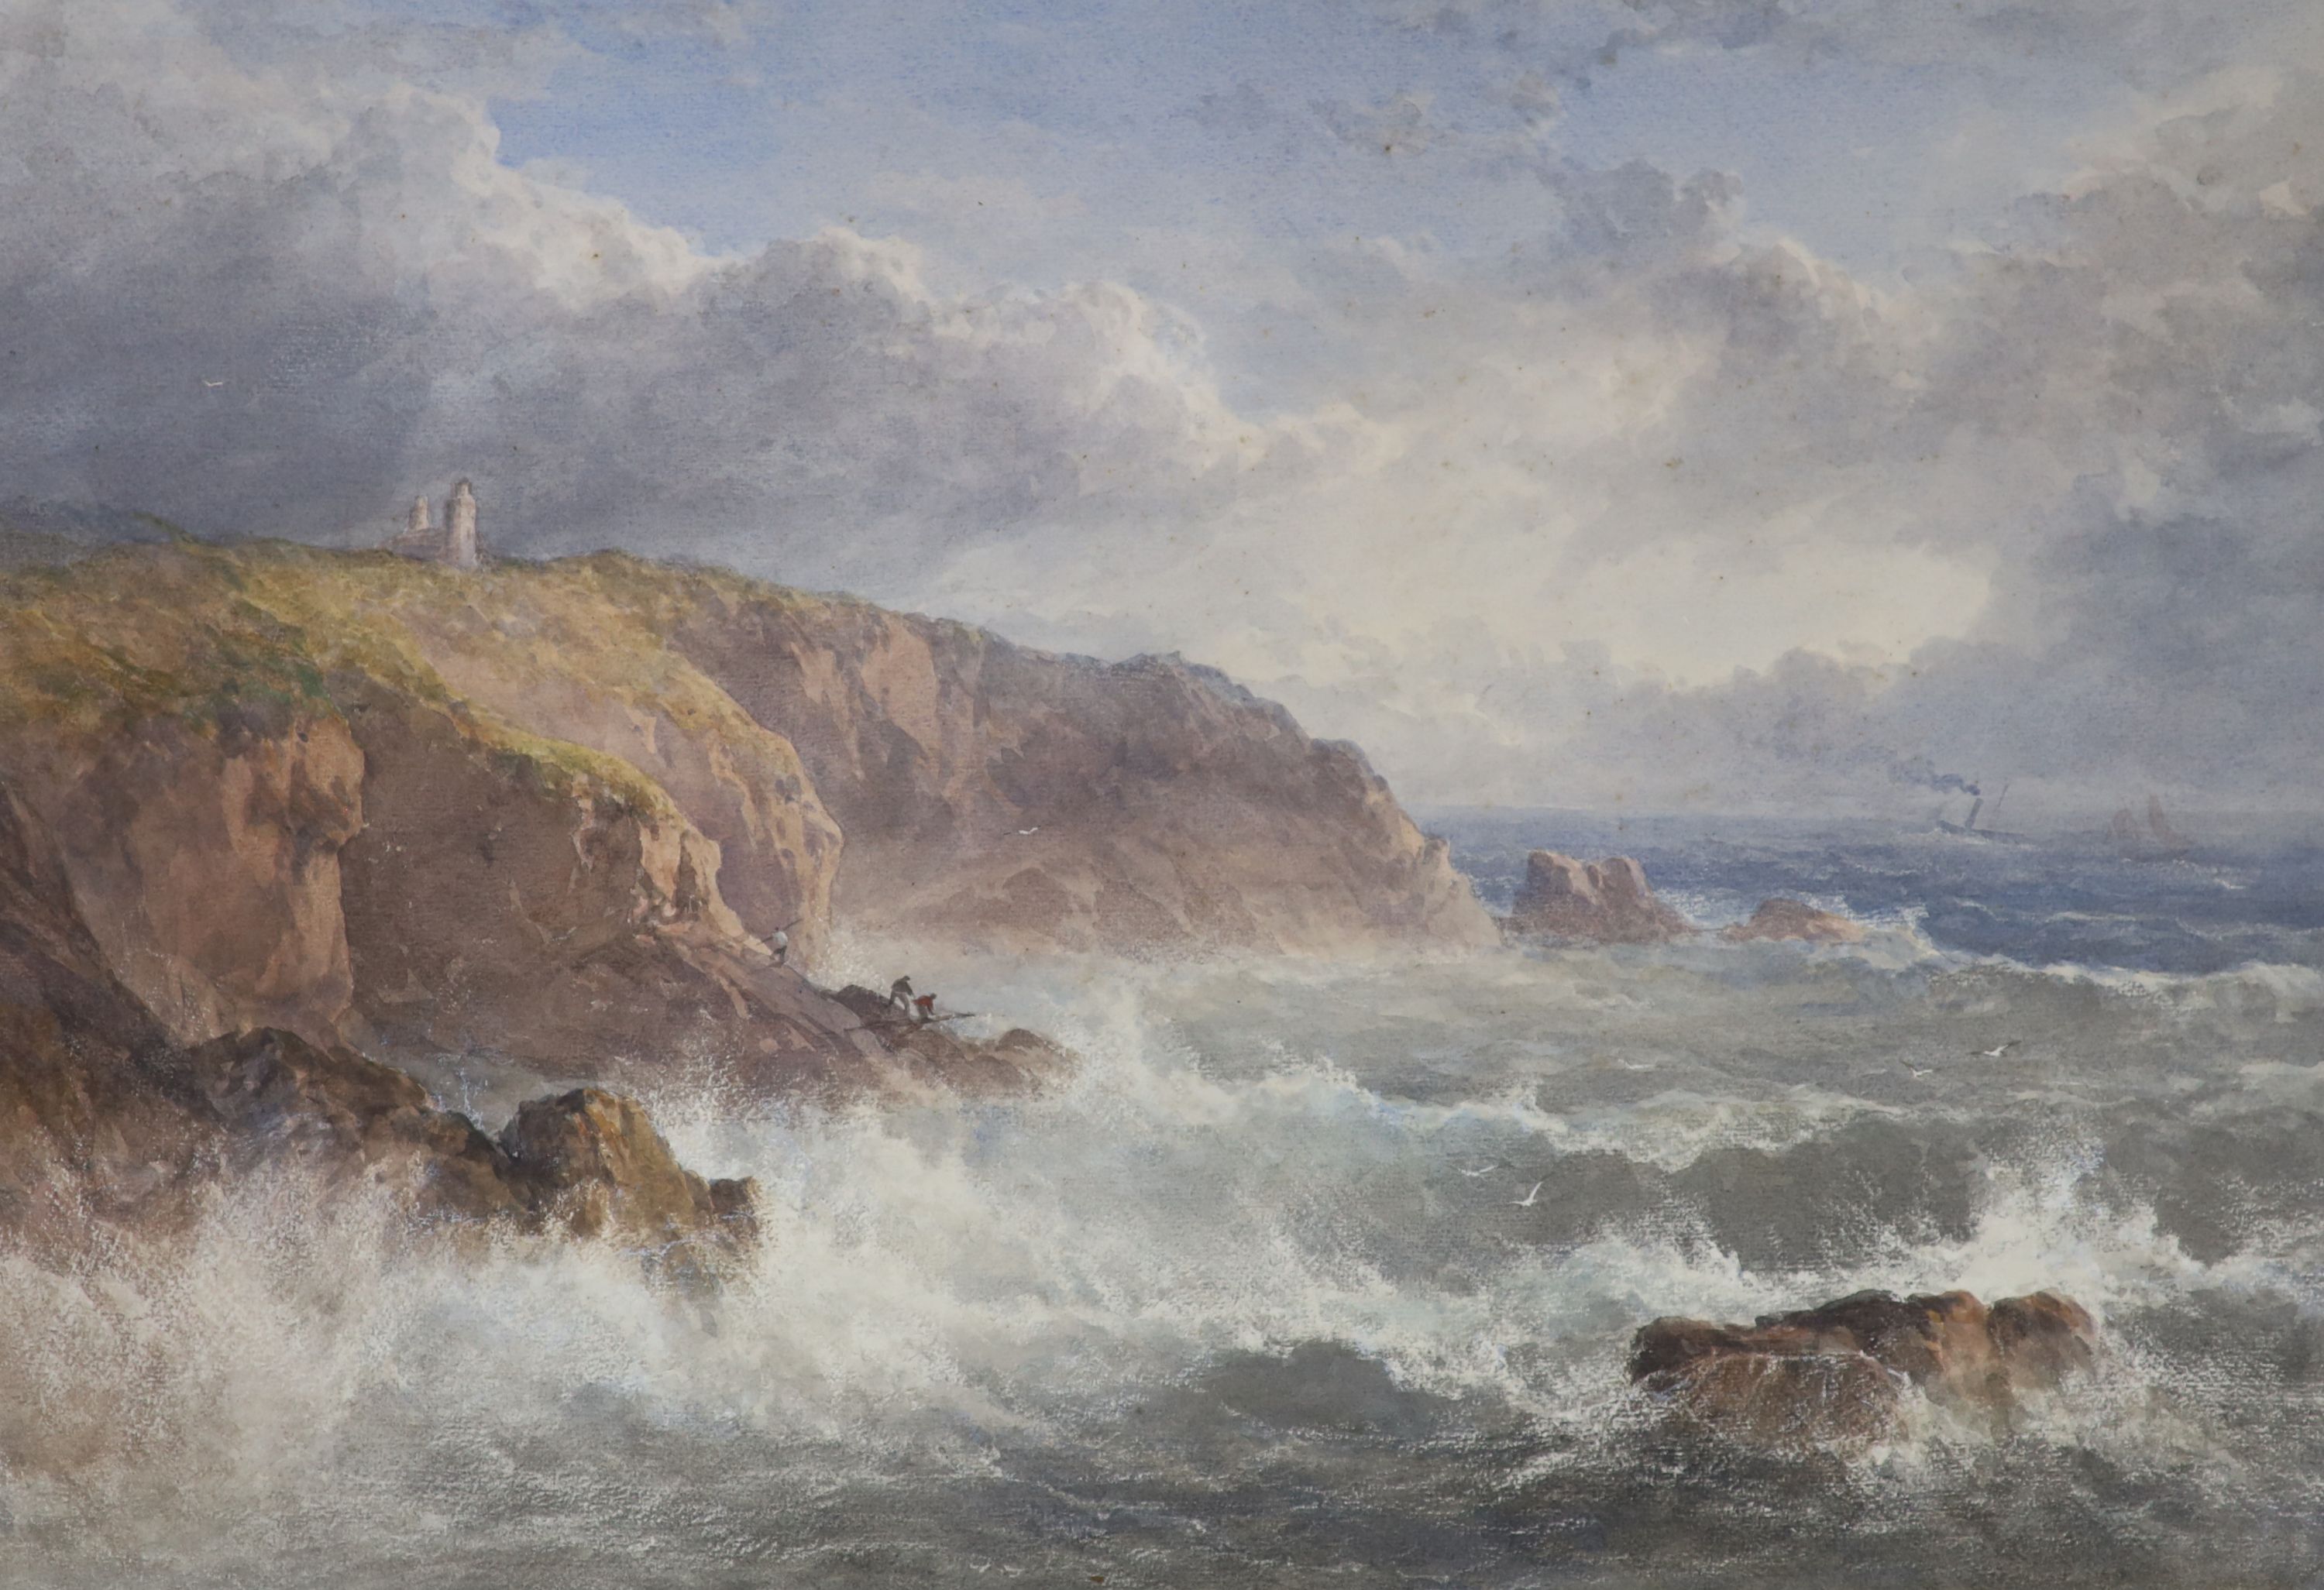 Attributed to Clarkson Stanfield (1793-1867) after Turner, watercolour, Coastal landscape, 43 x 61cm